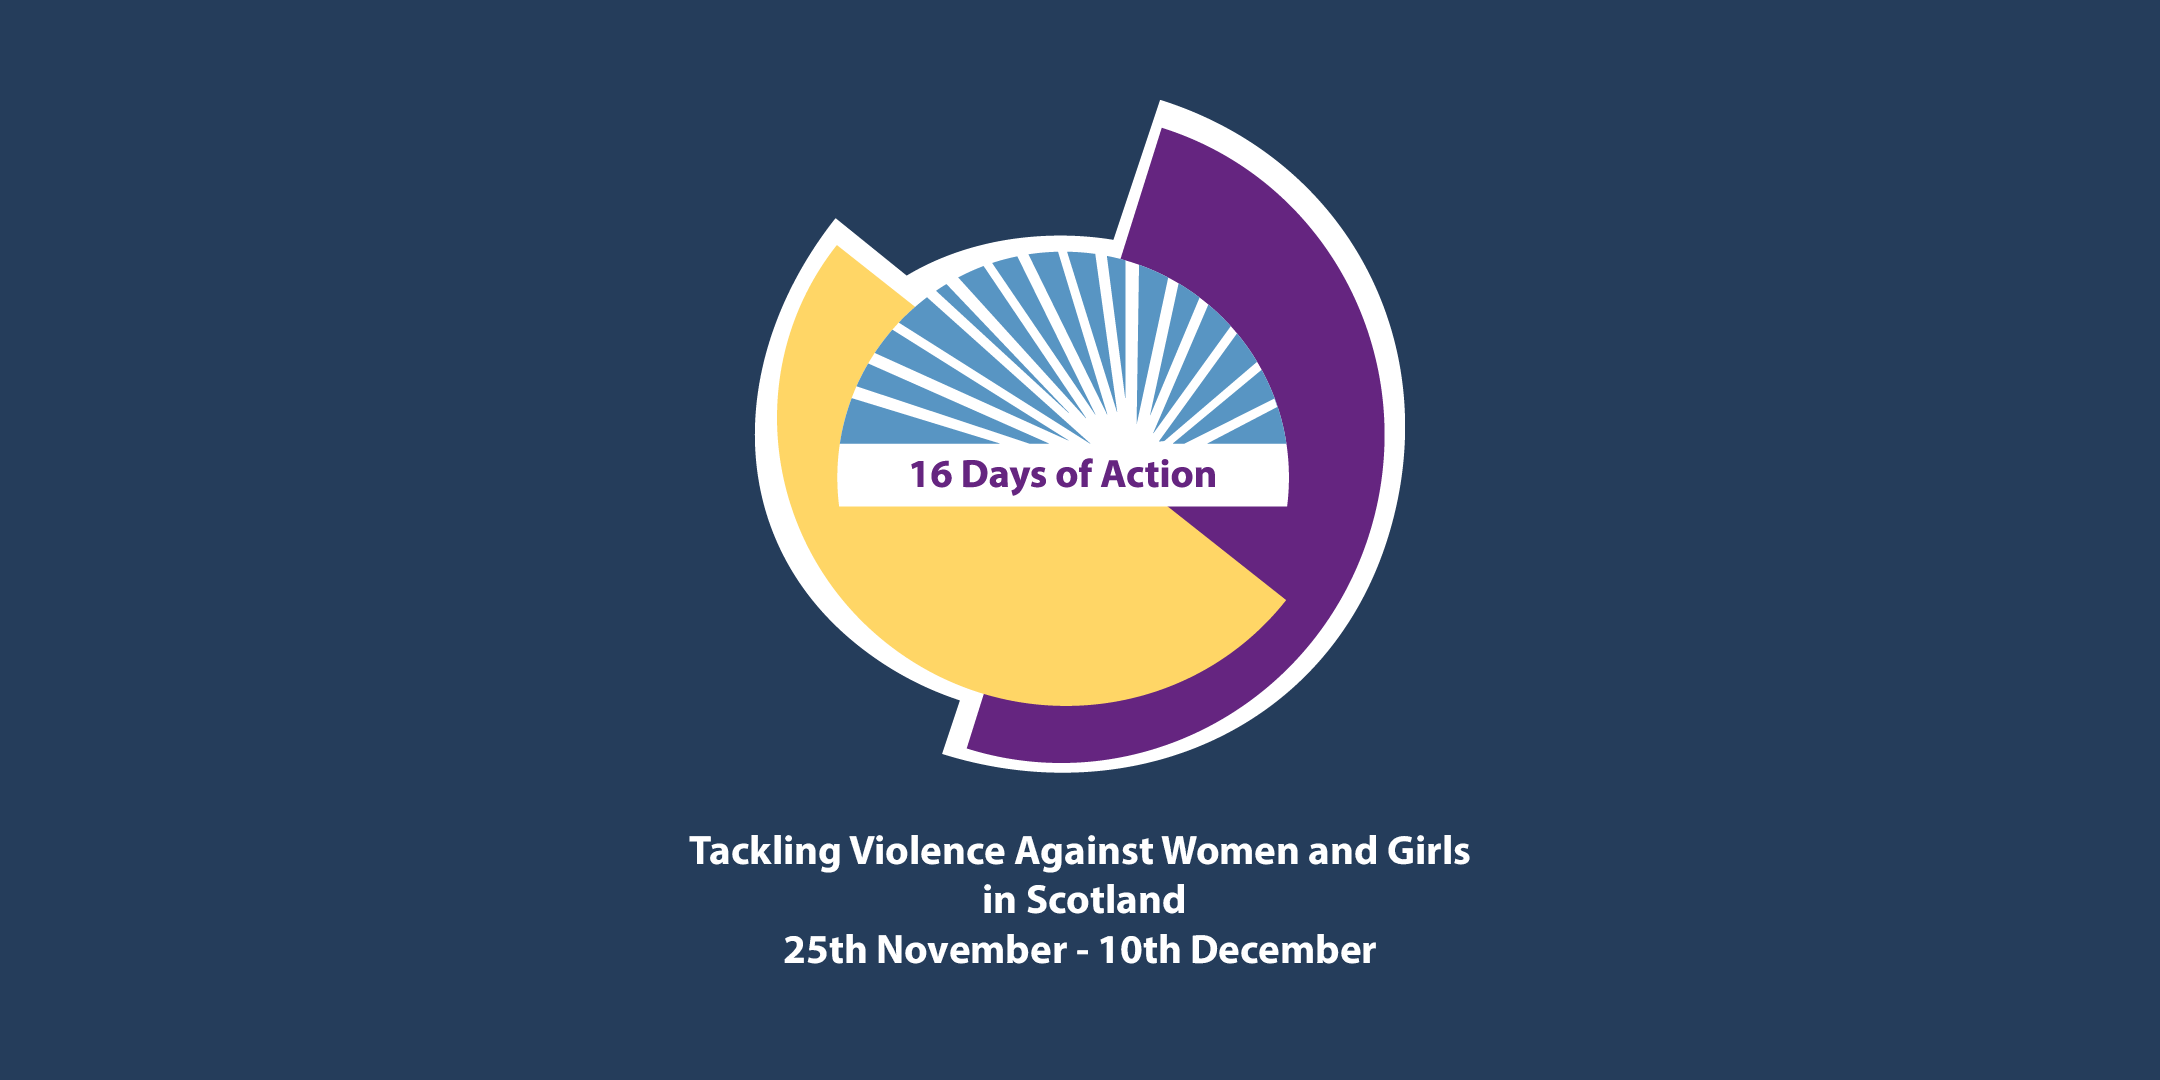 16 Days of Action, tackling violence against women and girls in Scotland, 25th November - 10th December